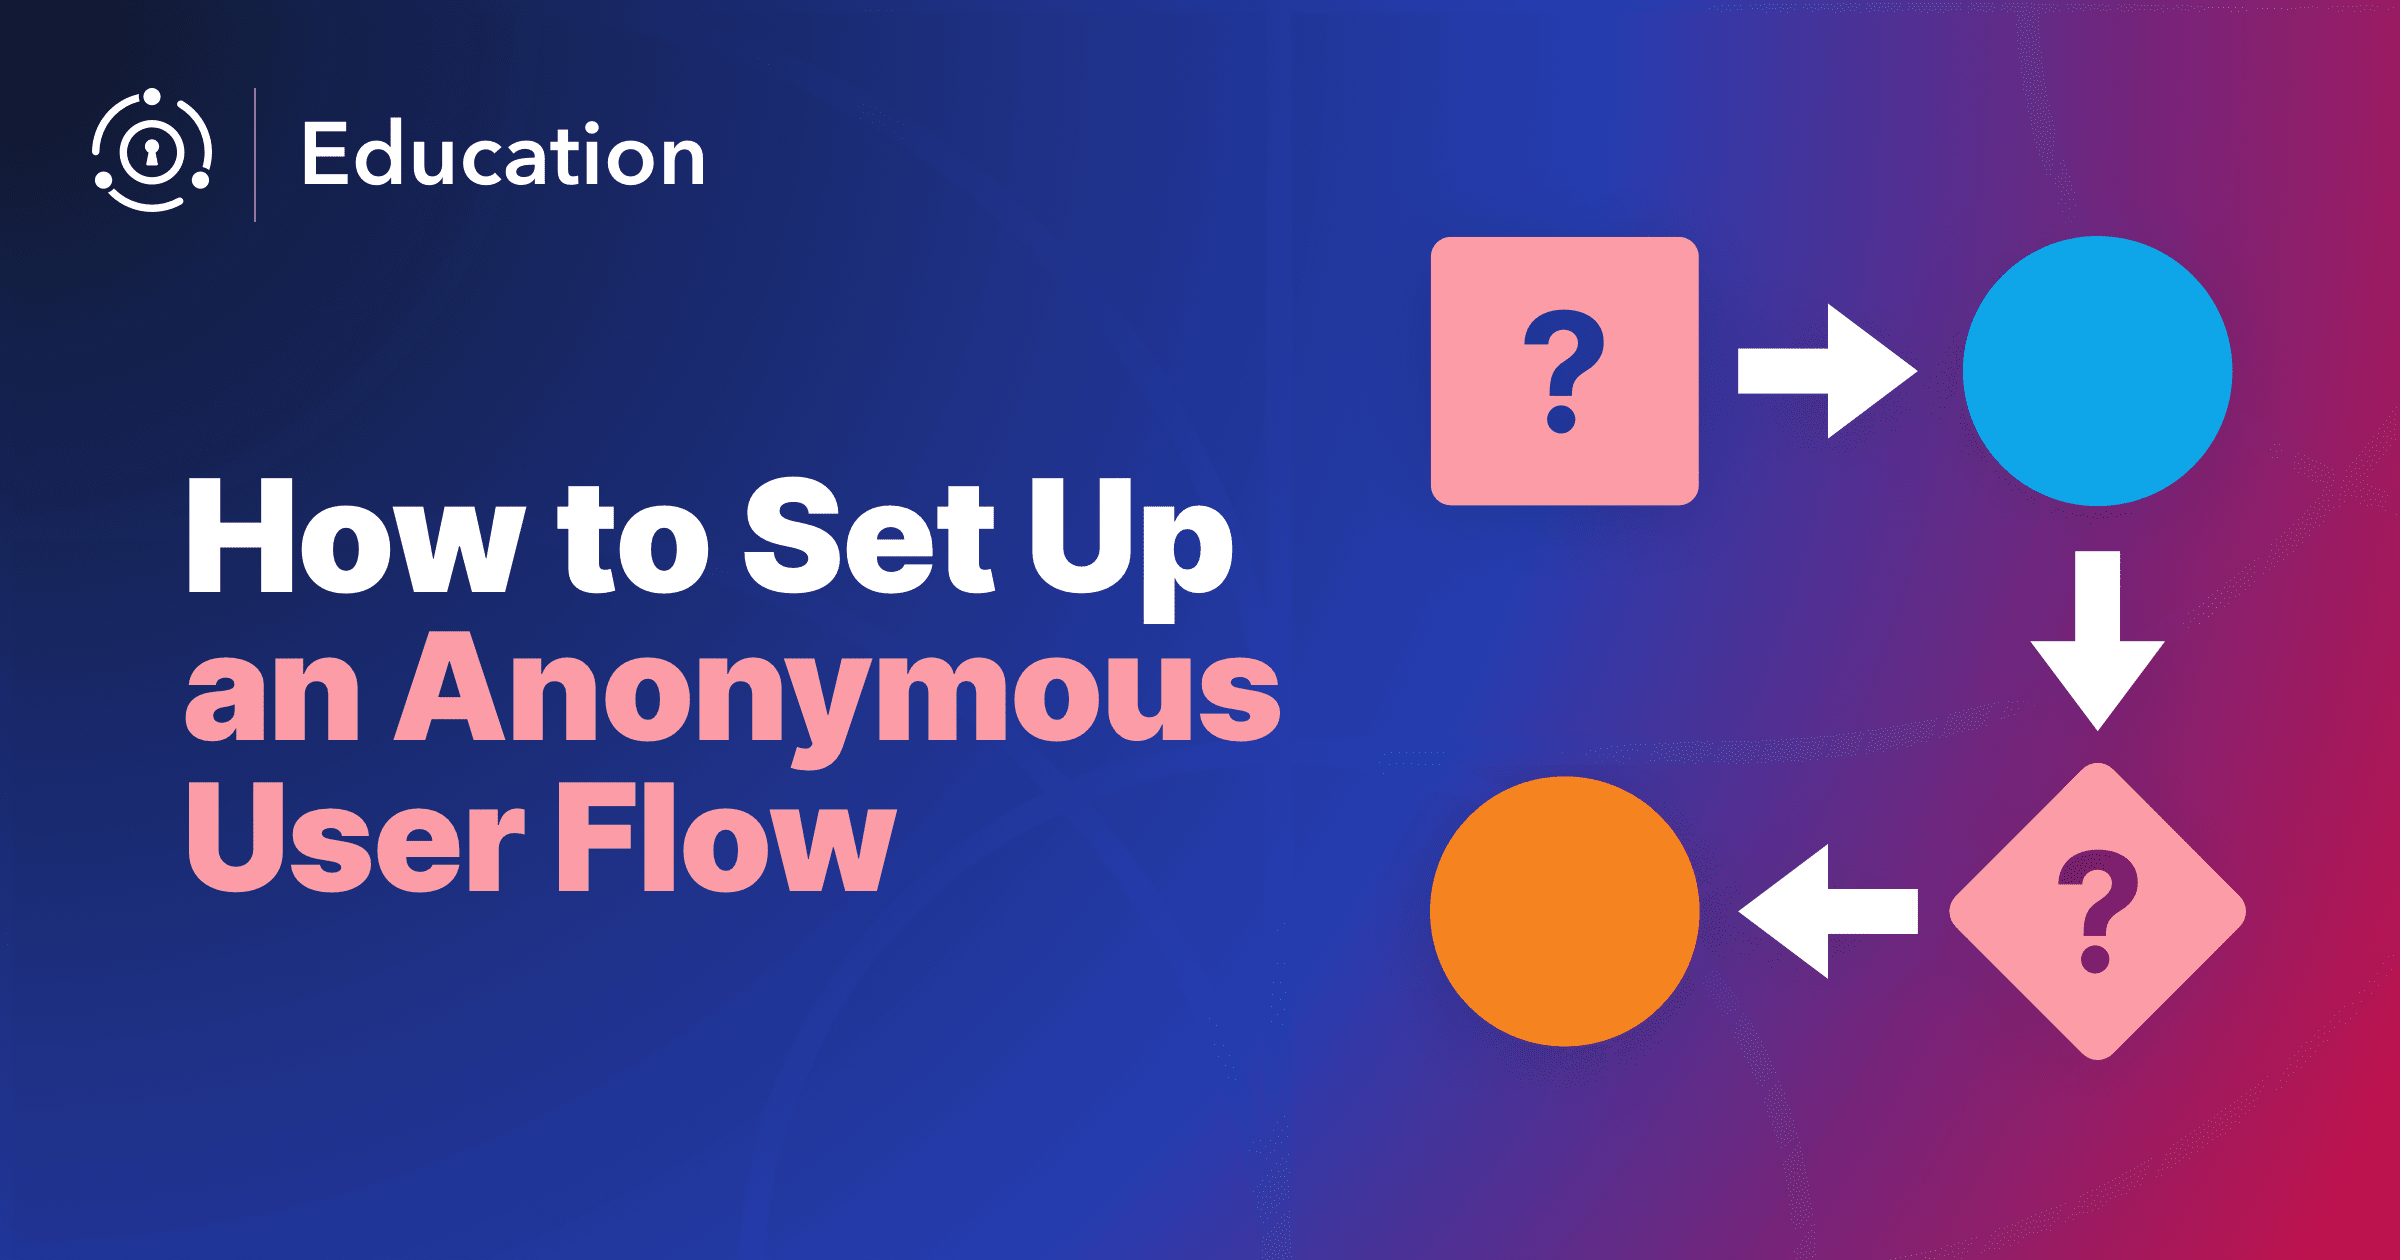 How to set up an anonymous user flow